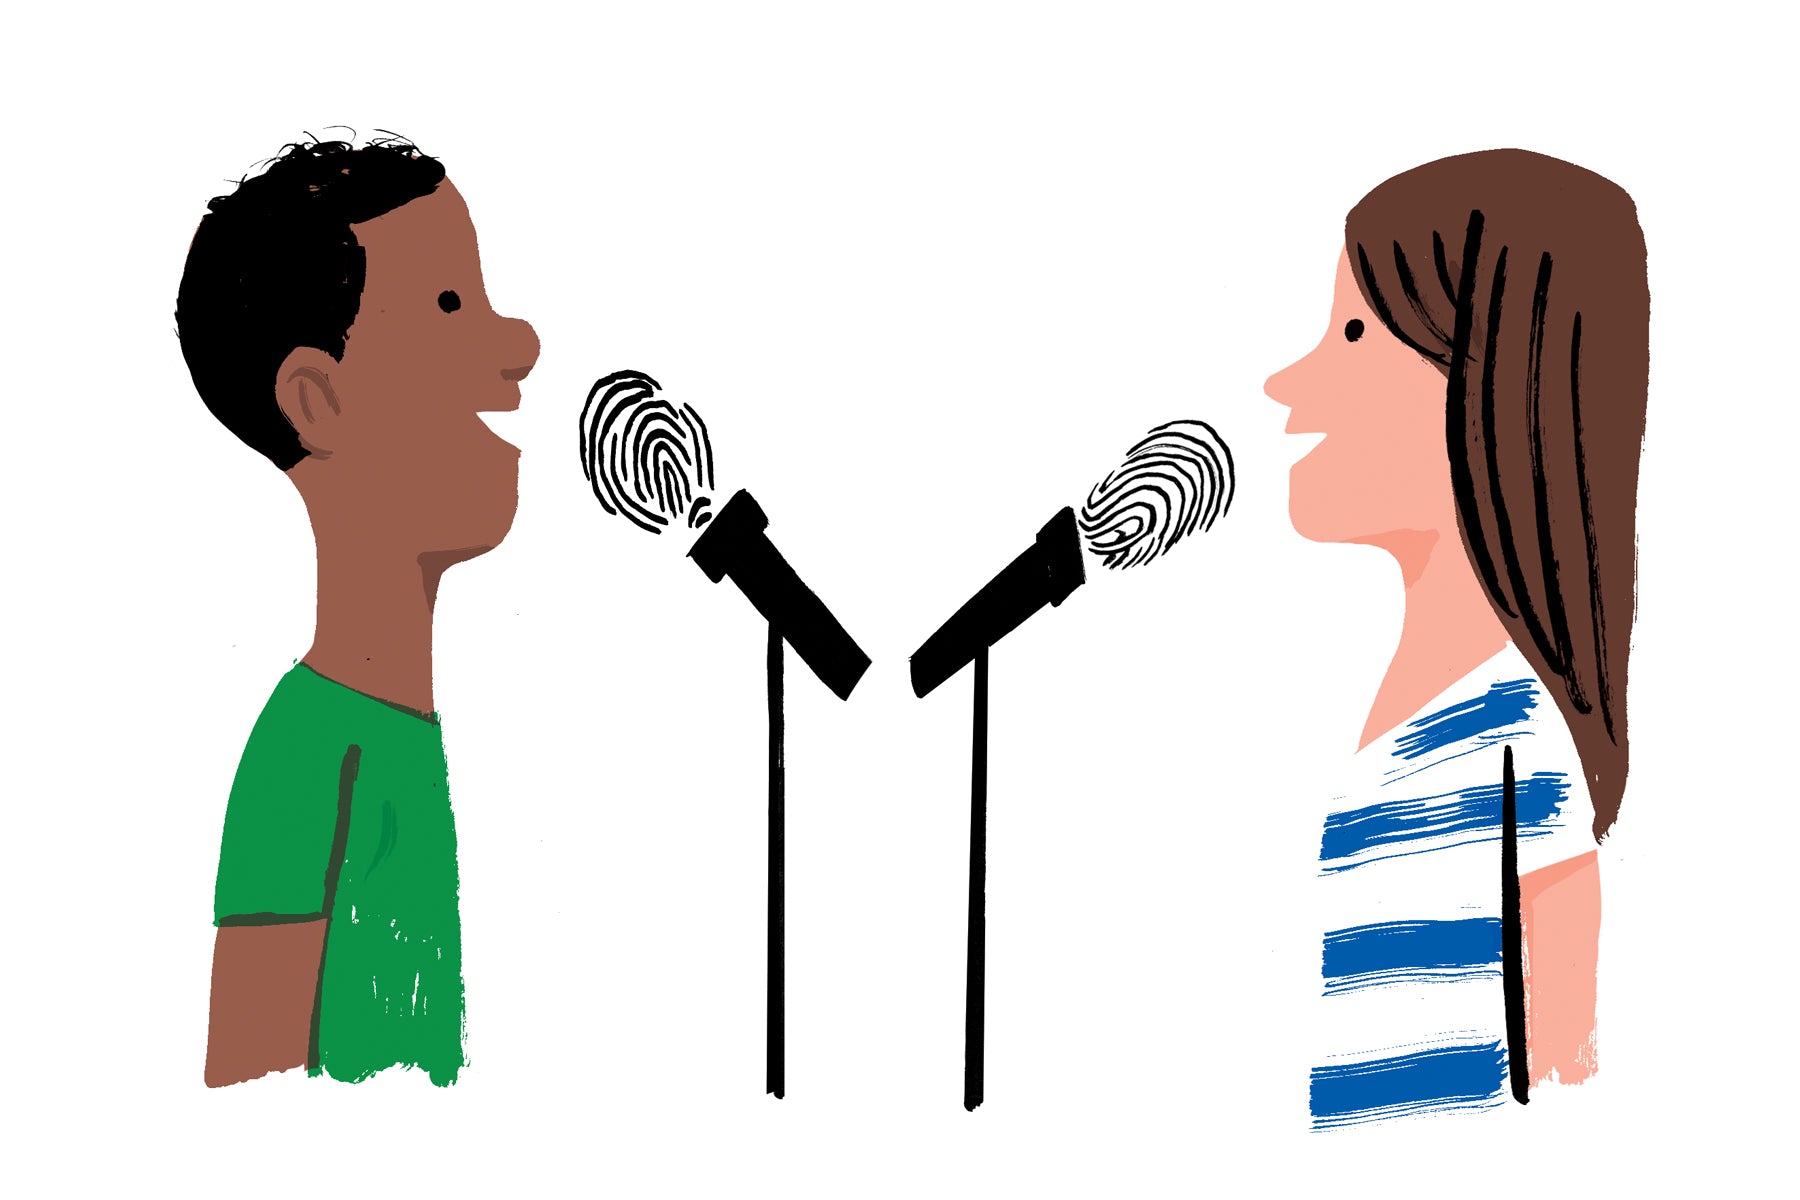 Illustration of two children speaking into a microphone but the microphone is a fingerprint. This is a metaphor for their individuality as they are introducing themselves. 